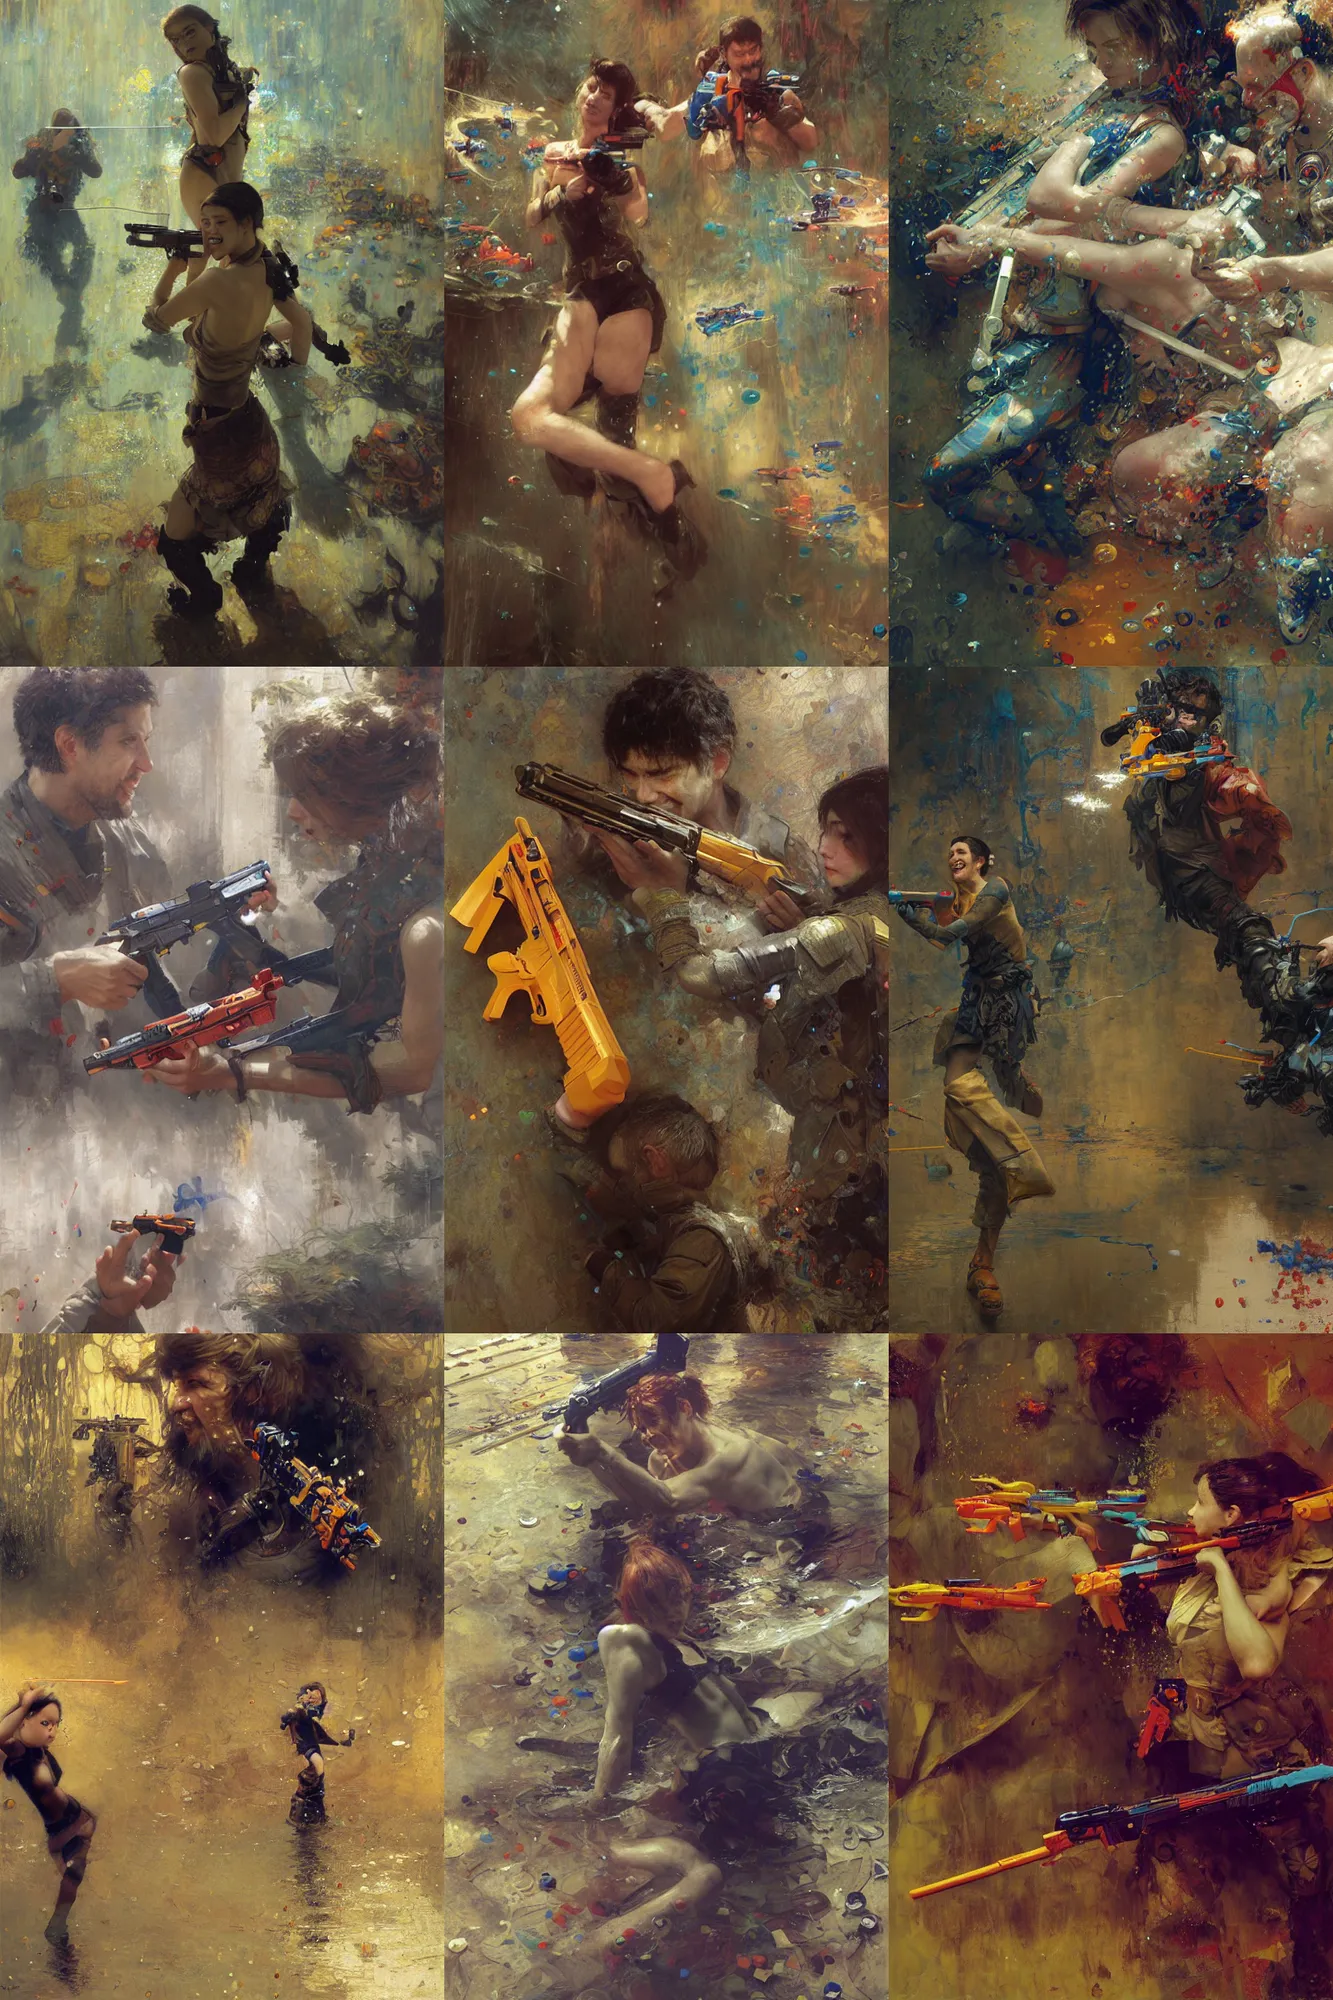 Prompt: laughing and playing with nerf water guns by waterhouse, craig mullins, ruan jia, gustave klimt